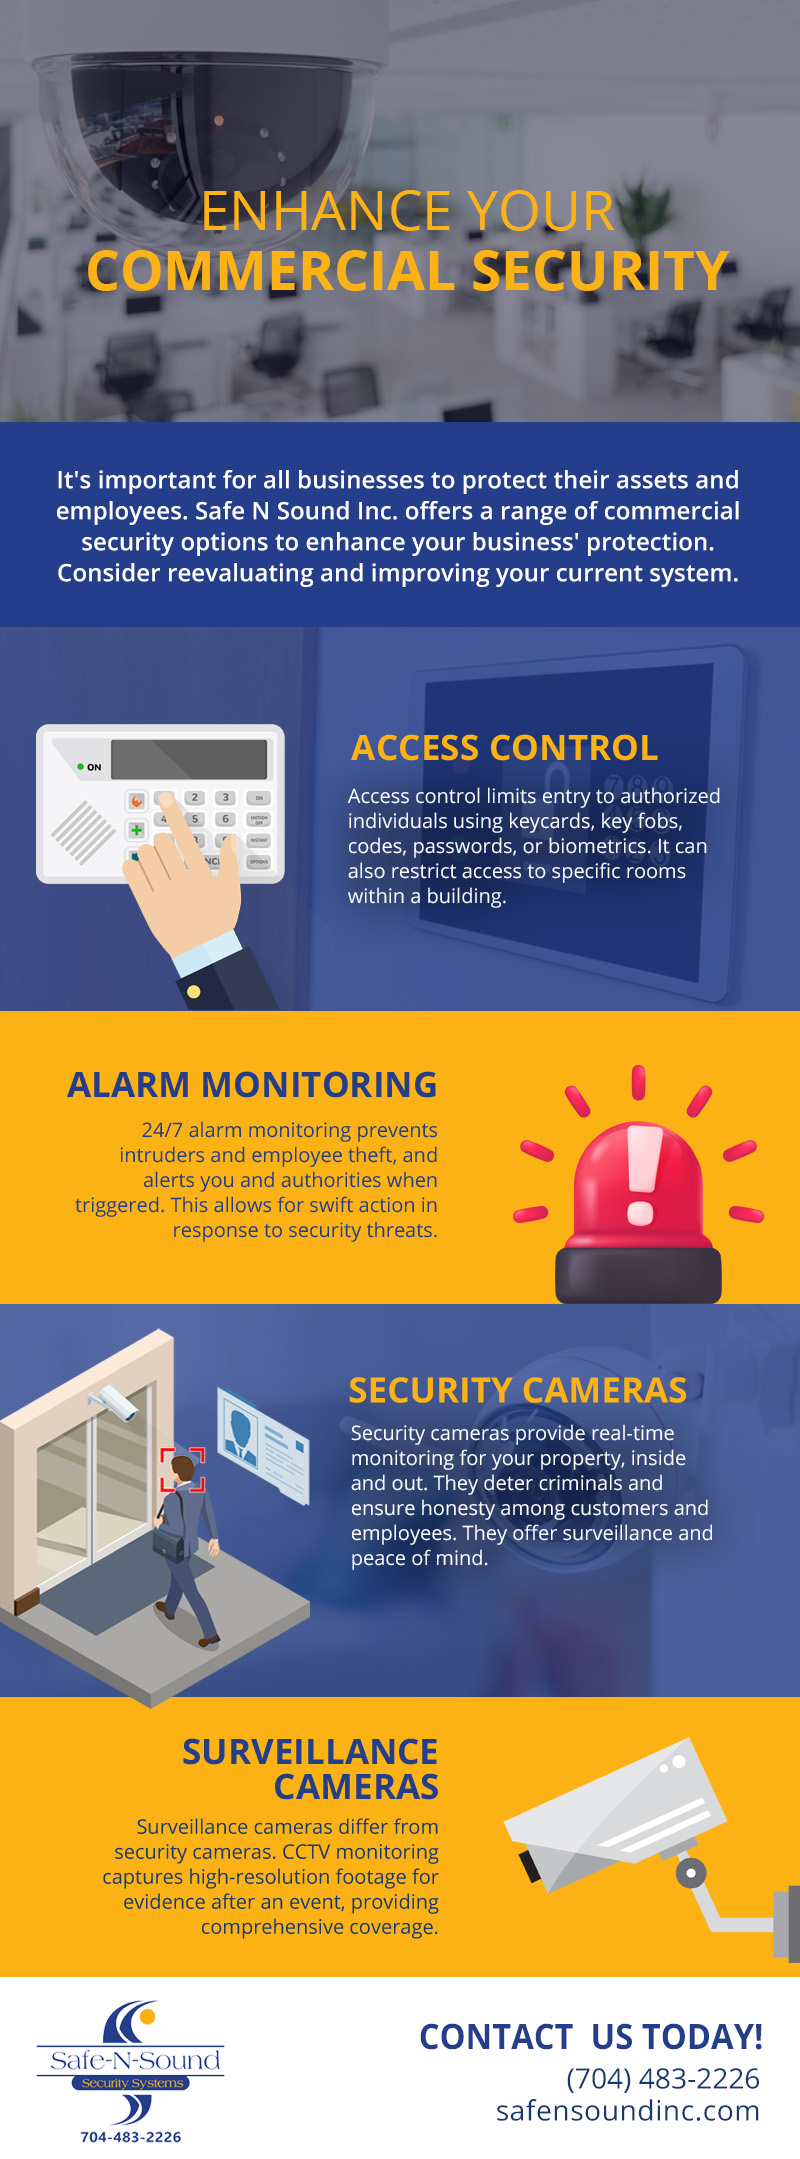 Enhance Your Commercial Security [infographic]